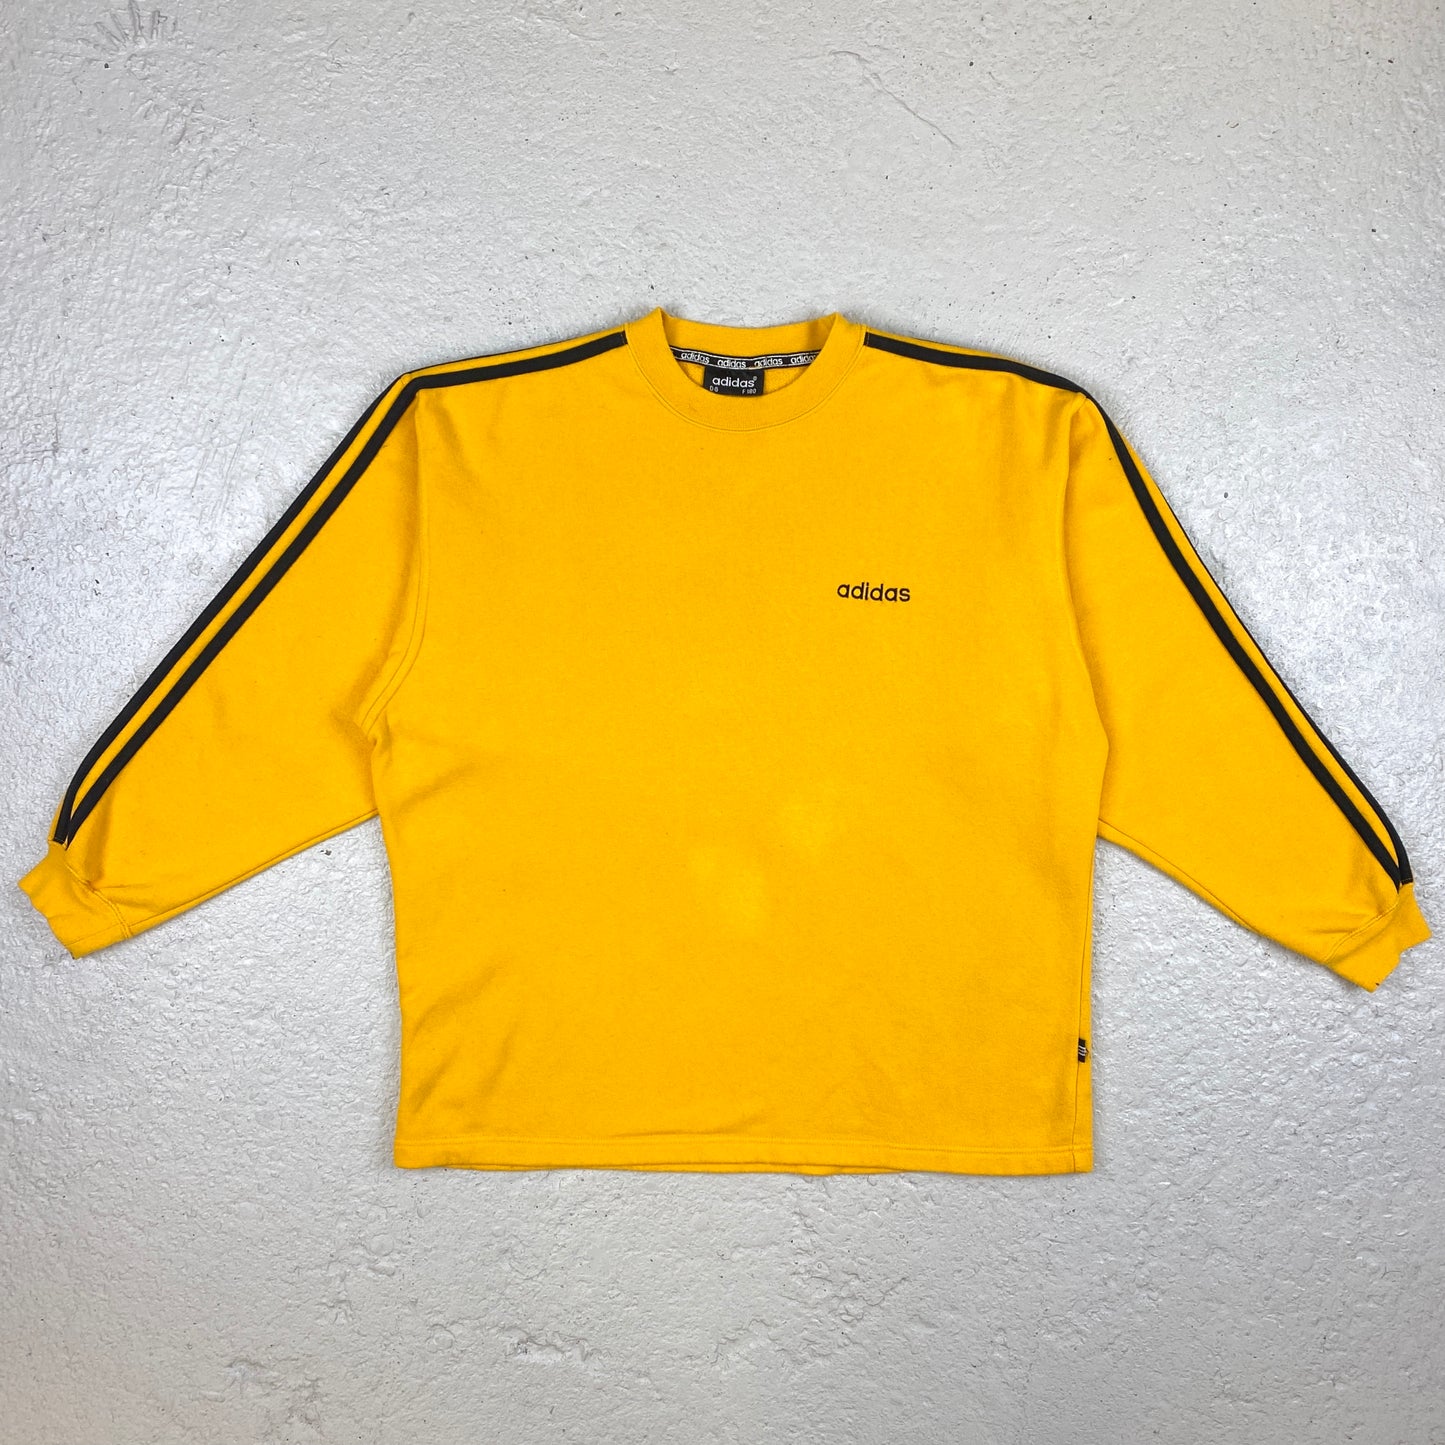 Adidas heavyweight embroidered sweater (M-L)